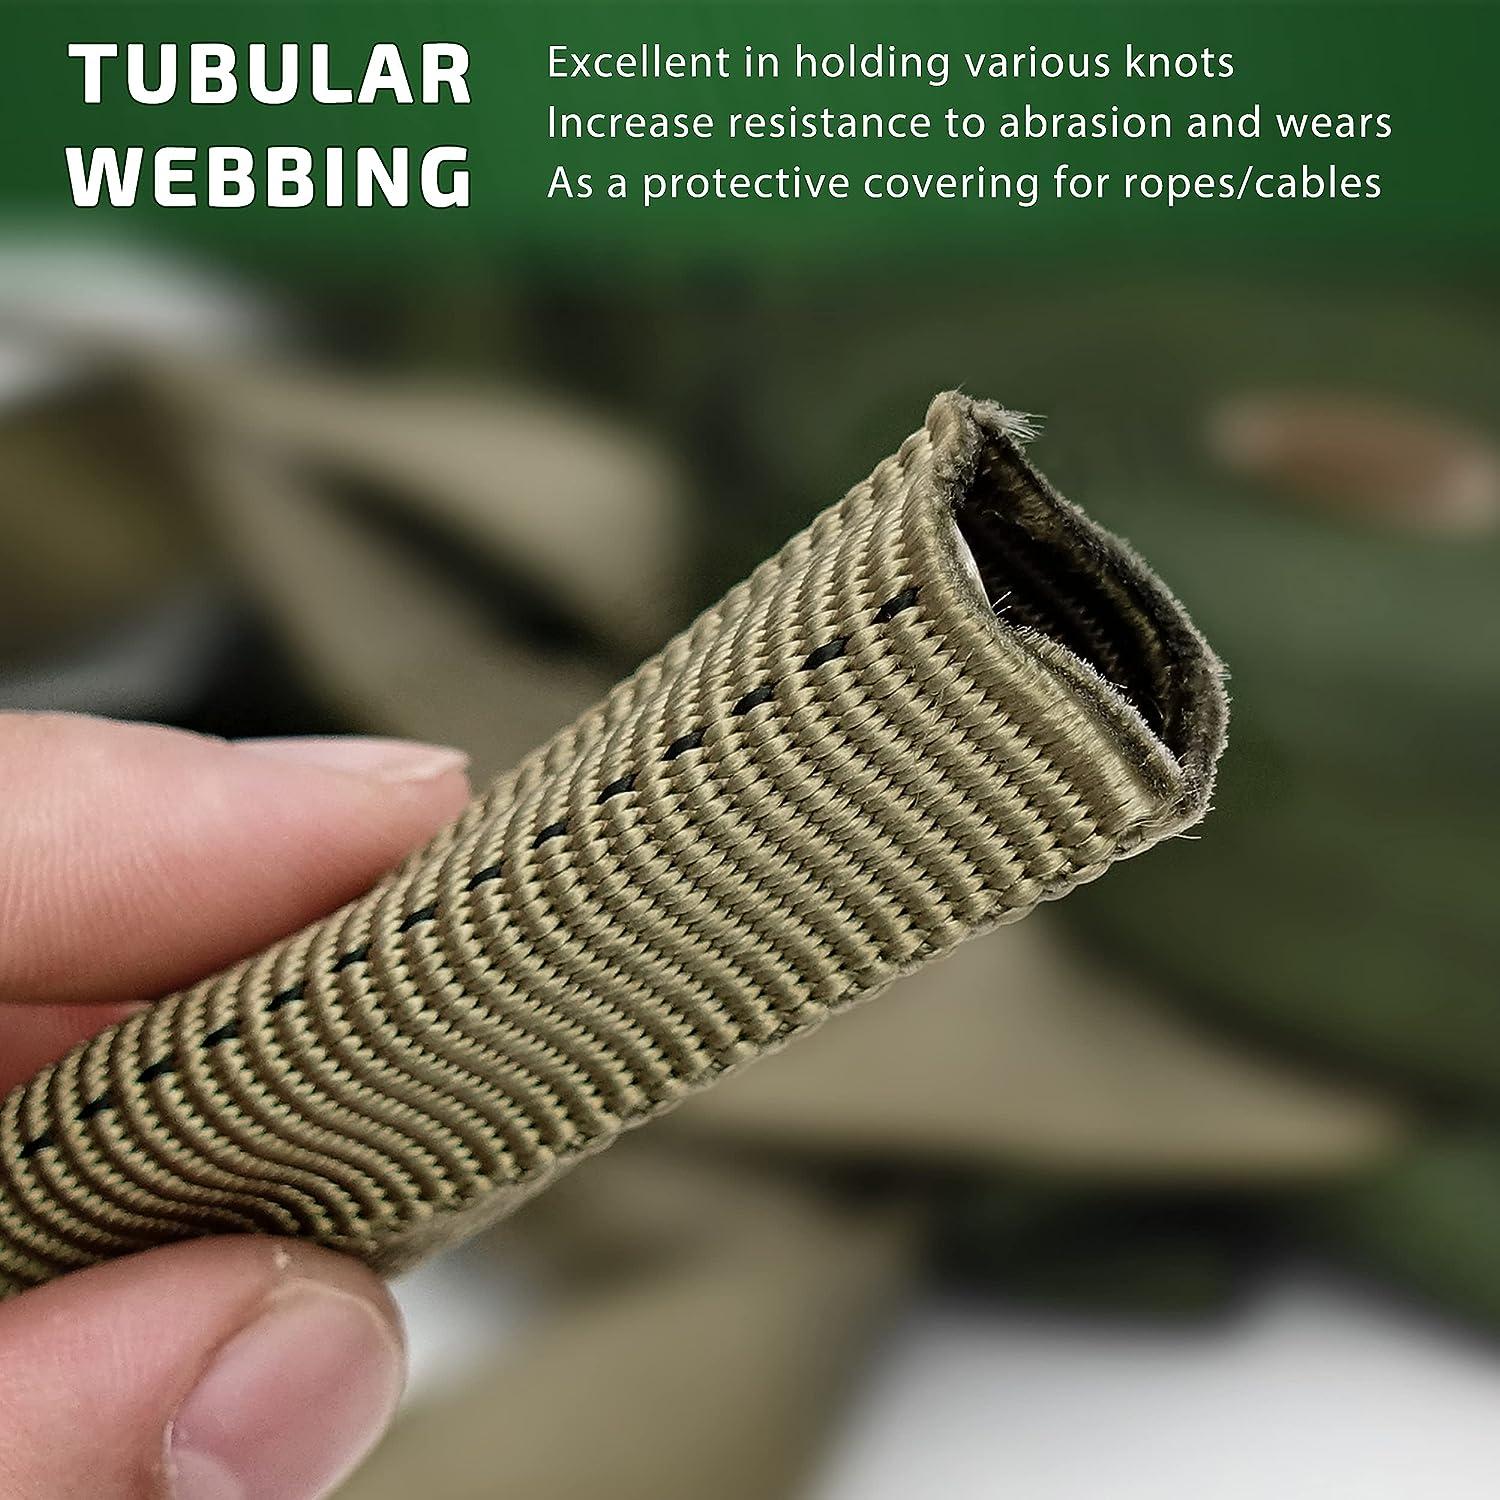 GM CLIMBING 1 inch Nylon Tubular Webbing Tape UIAA Certified 4000lb Heavy  Duty for Climbing Rescue Rope Works Survival Outdoor General Purposes 1 x  30Ft / 10 Yards Olive 1 inch x 10 yards